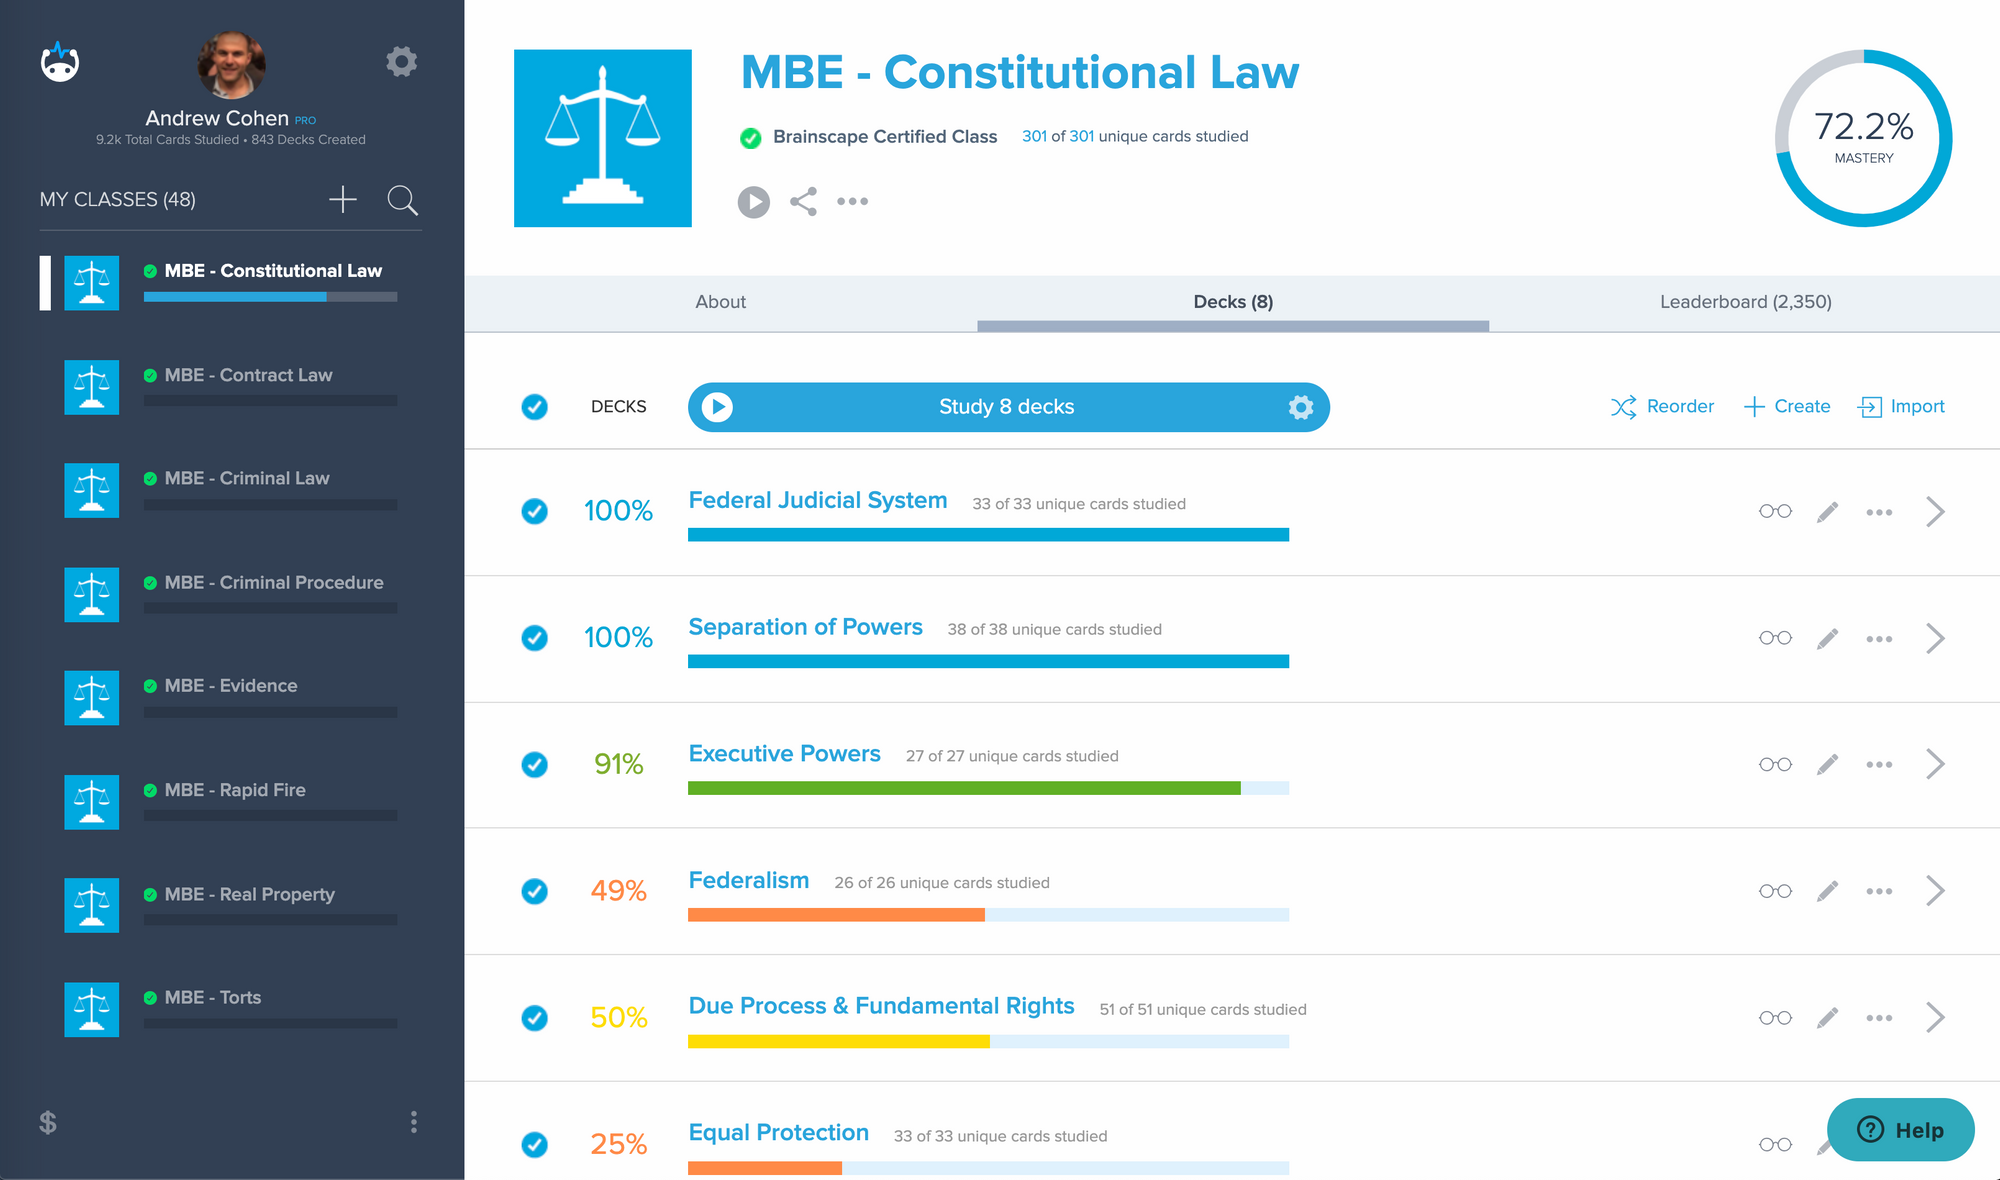 Brainscape flashcard dashboard for constitutional law showing study progress